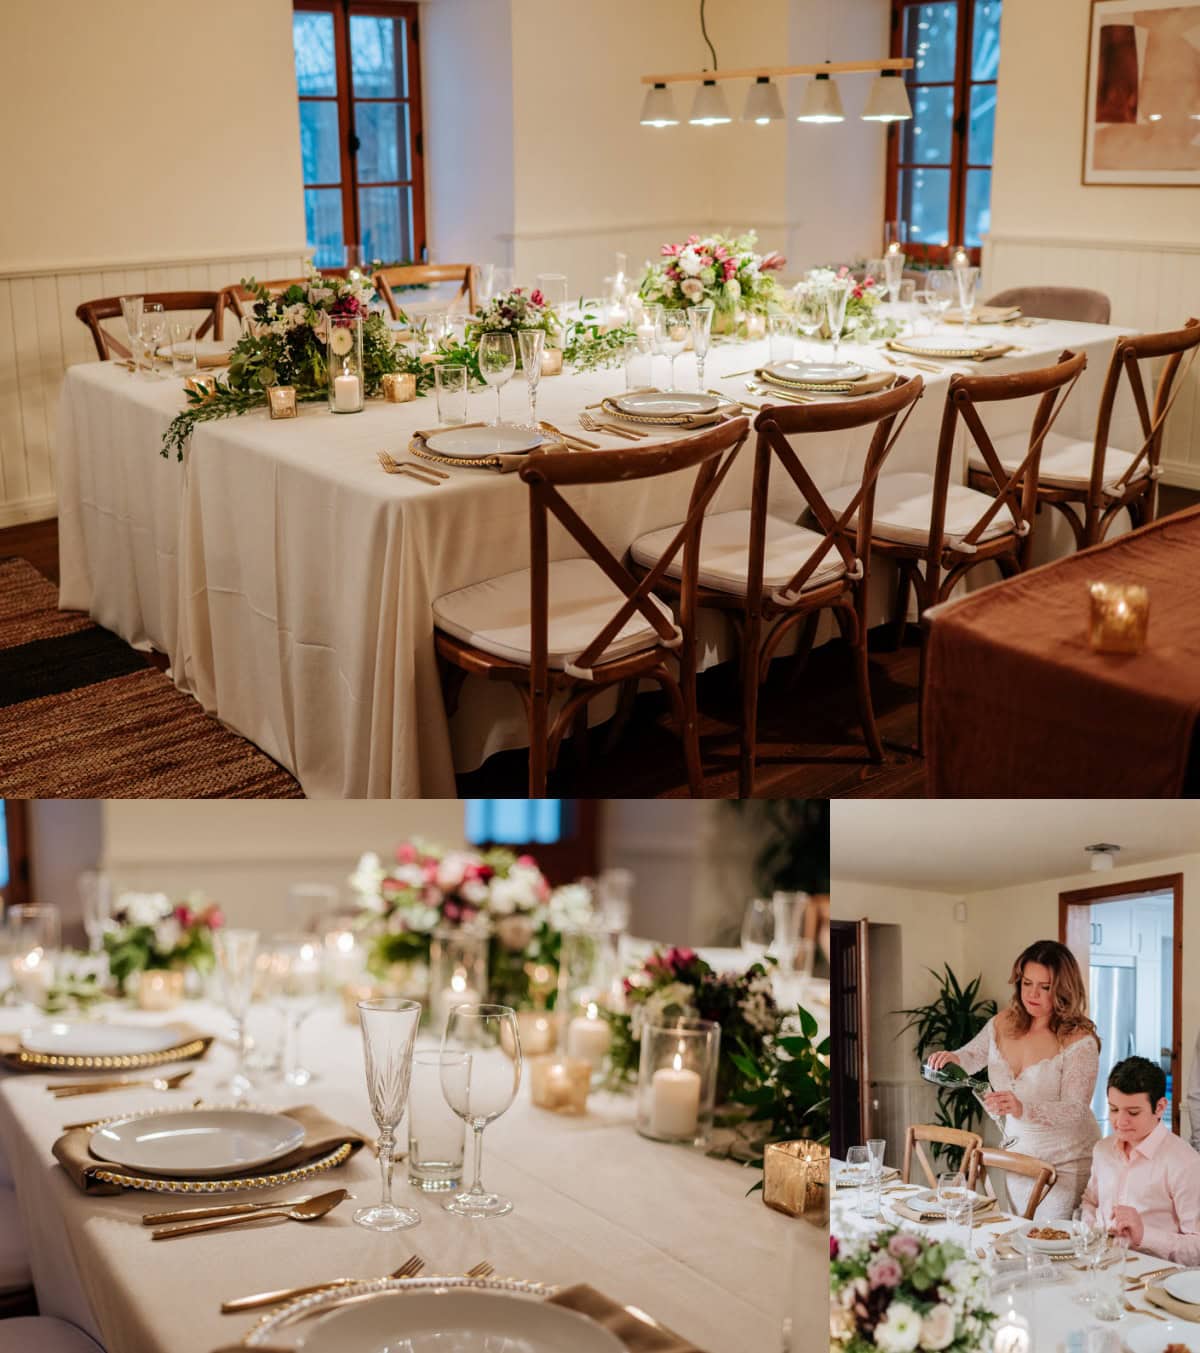 A Winter Dinner Party Wedding: An Intimate Celebration - C'est